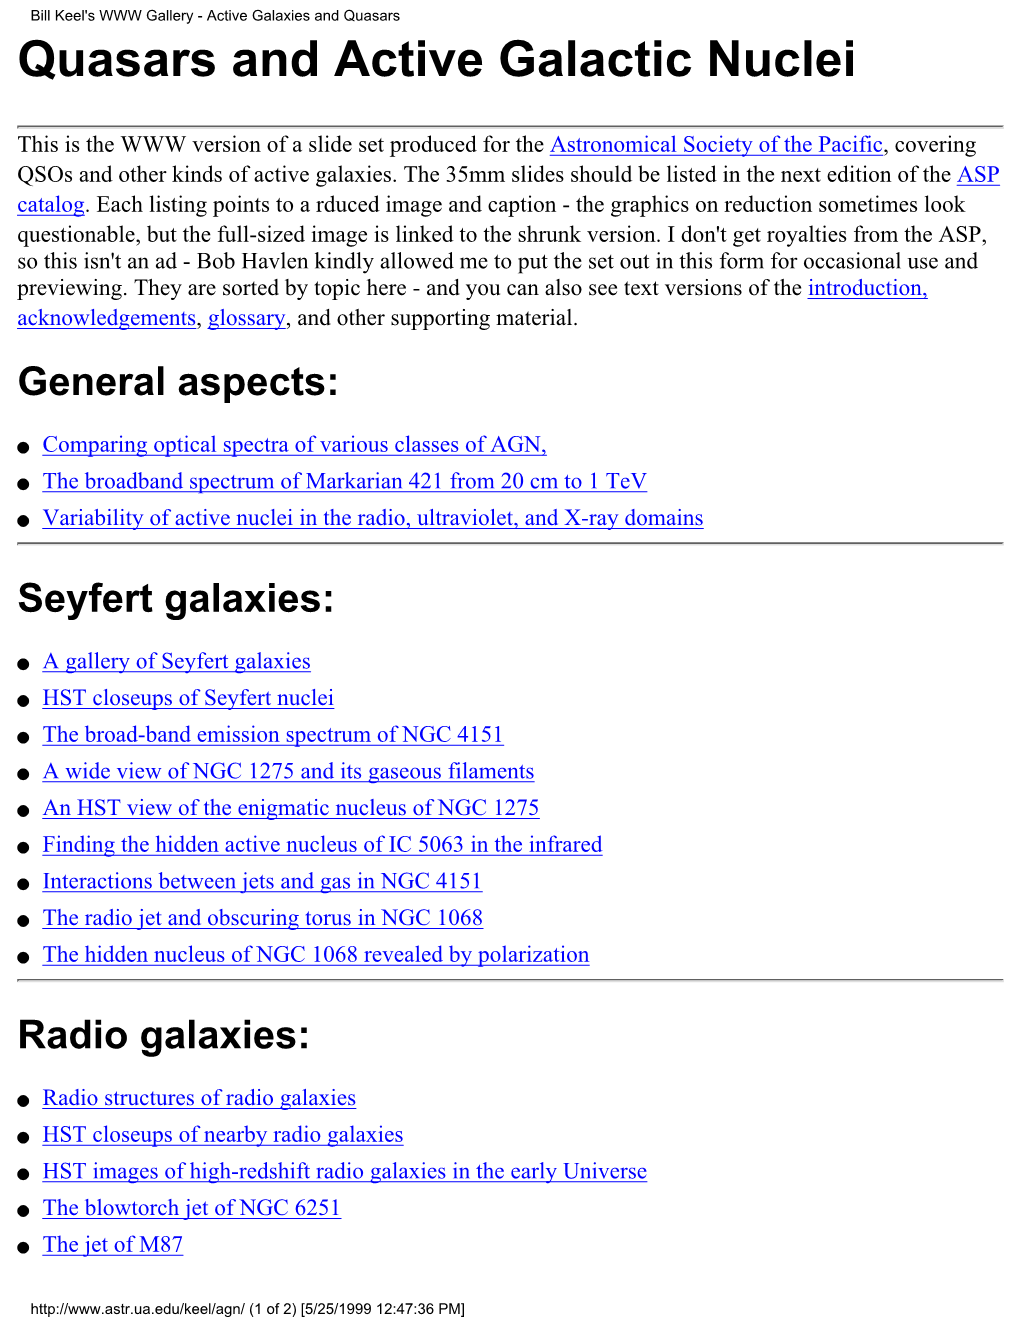 Bill Keel's WWW Gallery - Active Galaxies and Quasars Quasars and Active Galactic Nuclei